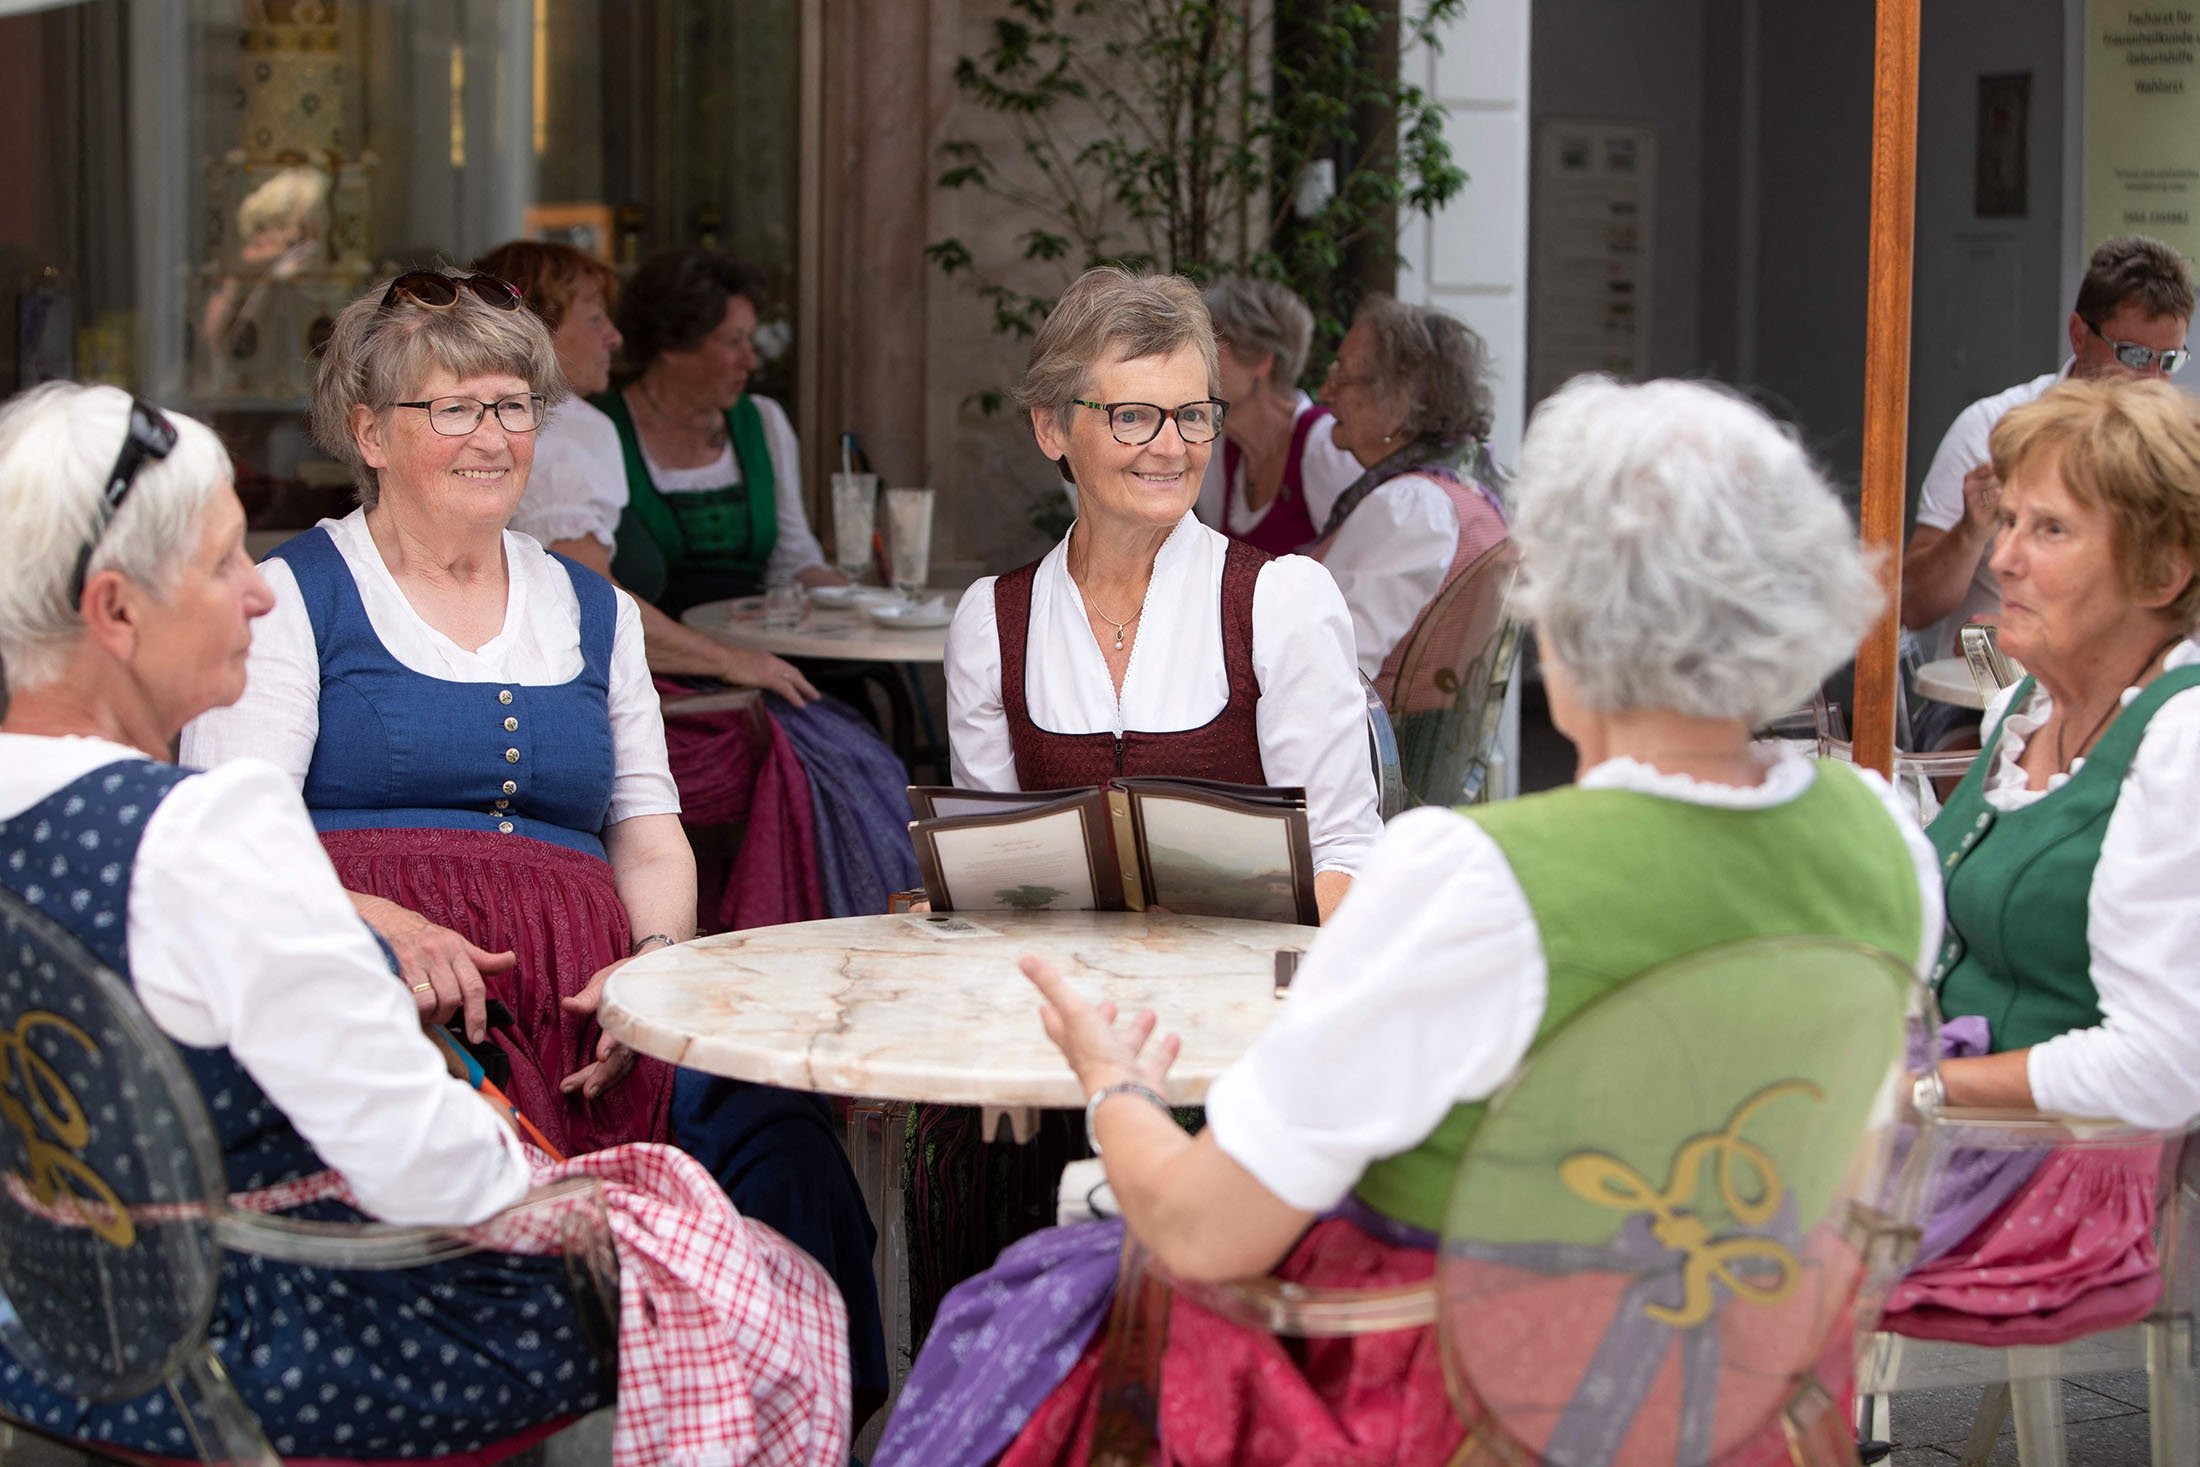 Guests wearing dirndl dreses sit at the Zauner coffee house in Bad Ischl, Upper Austria, June 24, 2021. (AFP Photo)